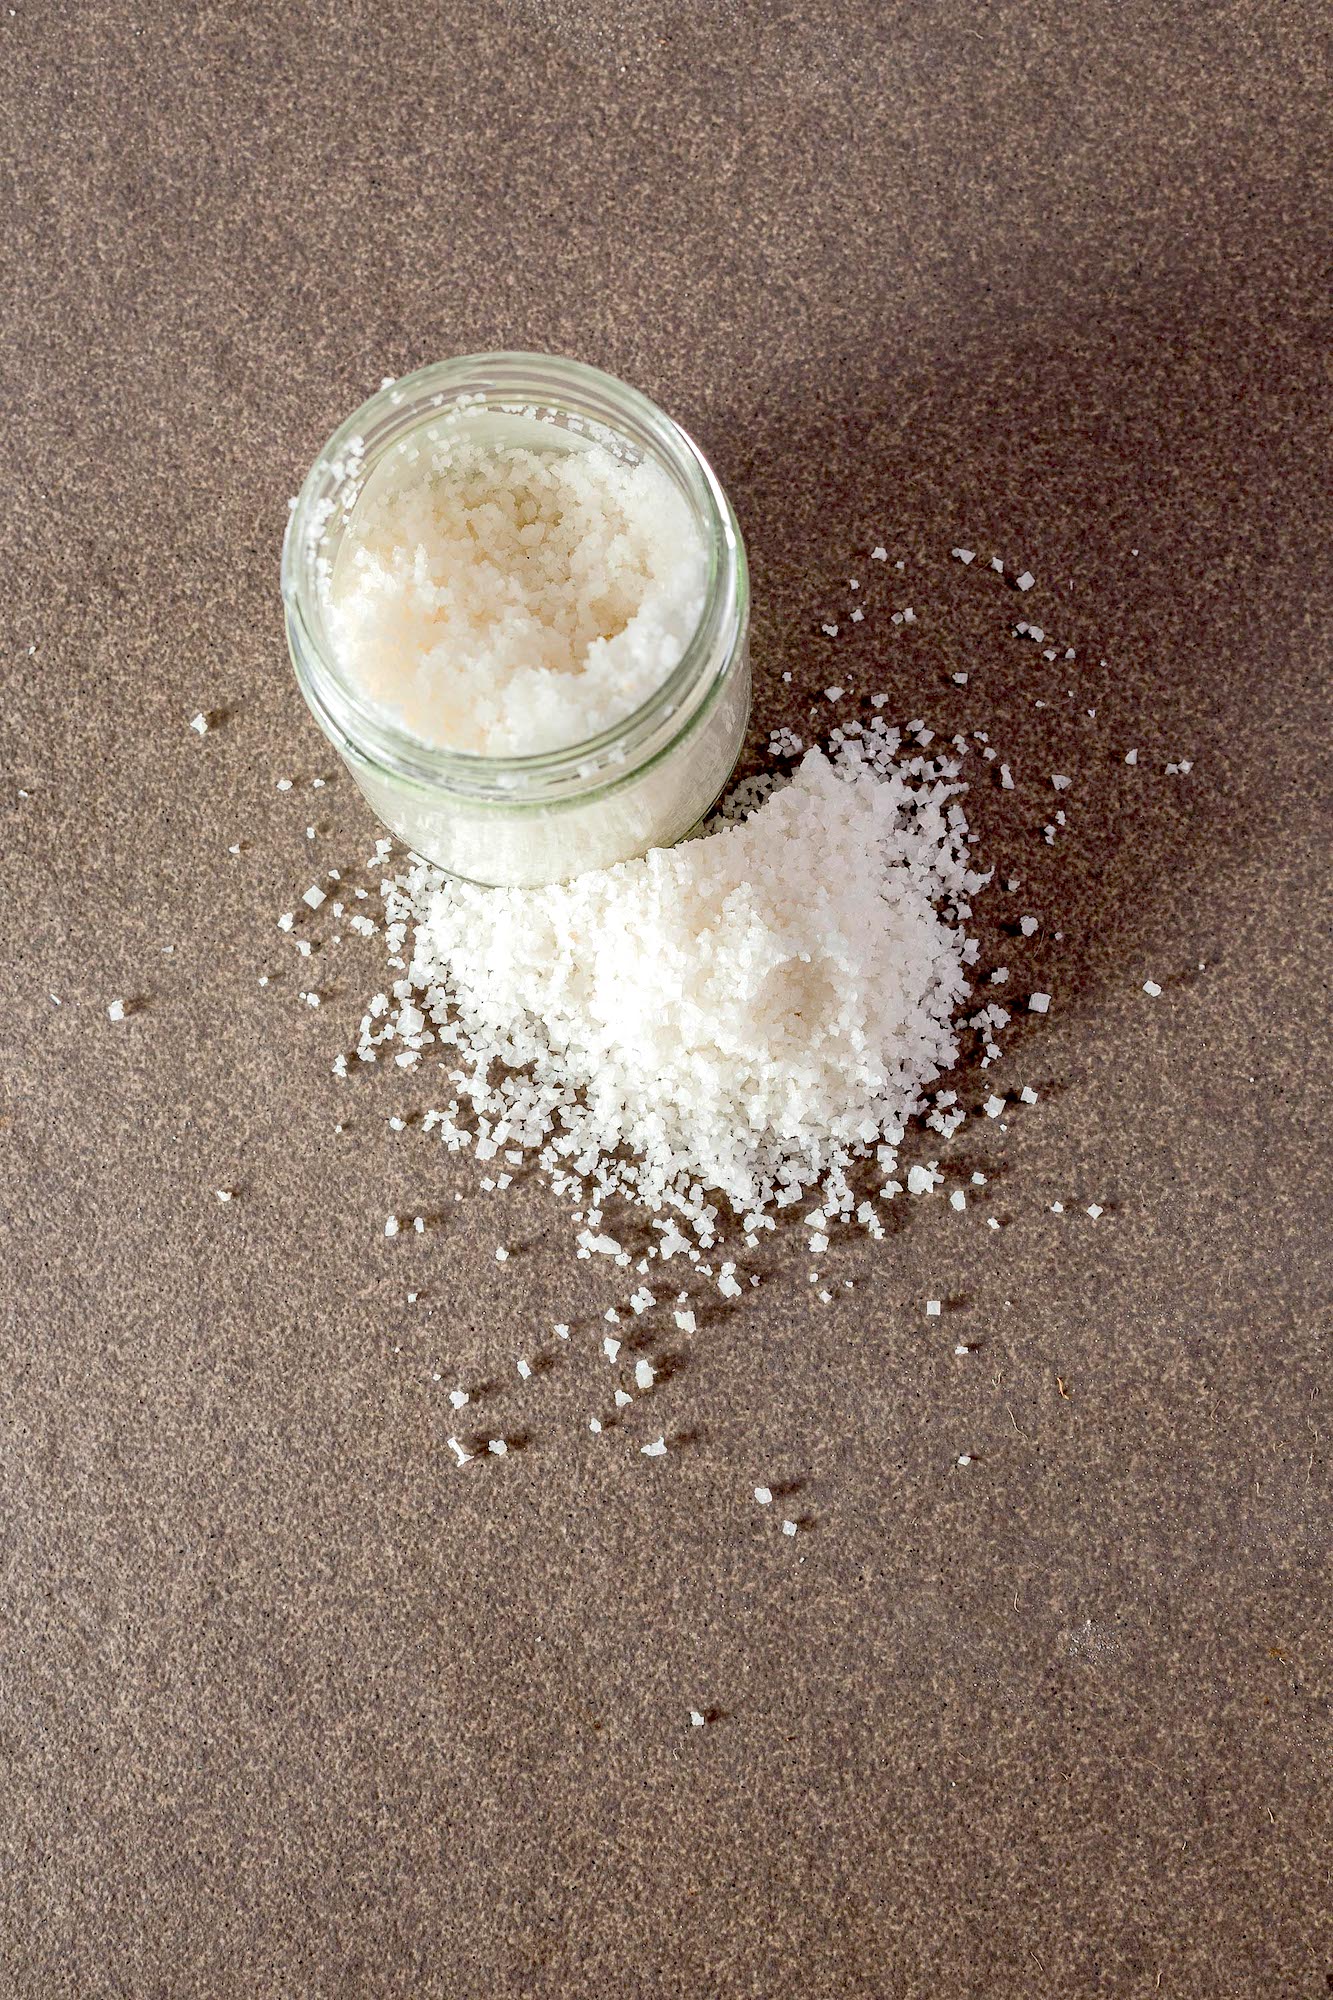 Sugpo asin is the most famous of the three varieties of Philippine artisanal salt